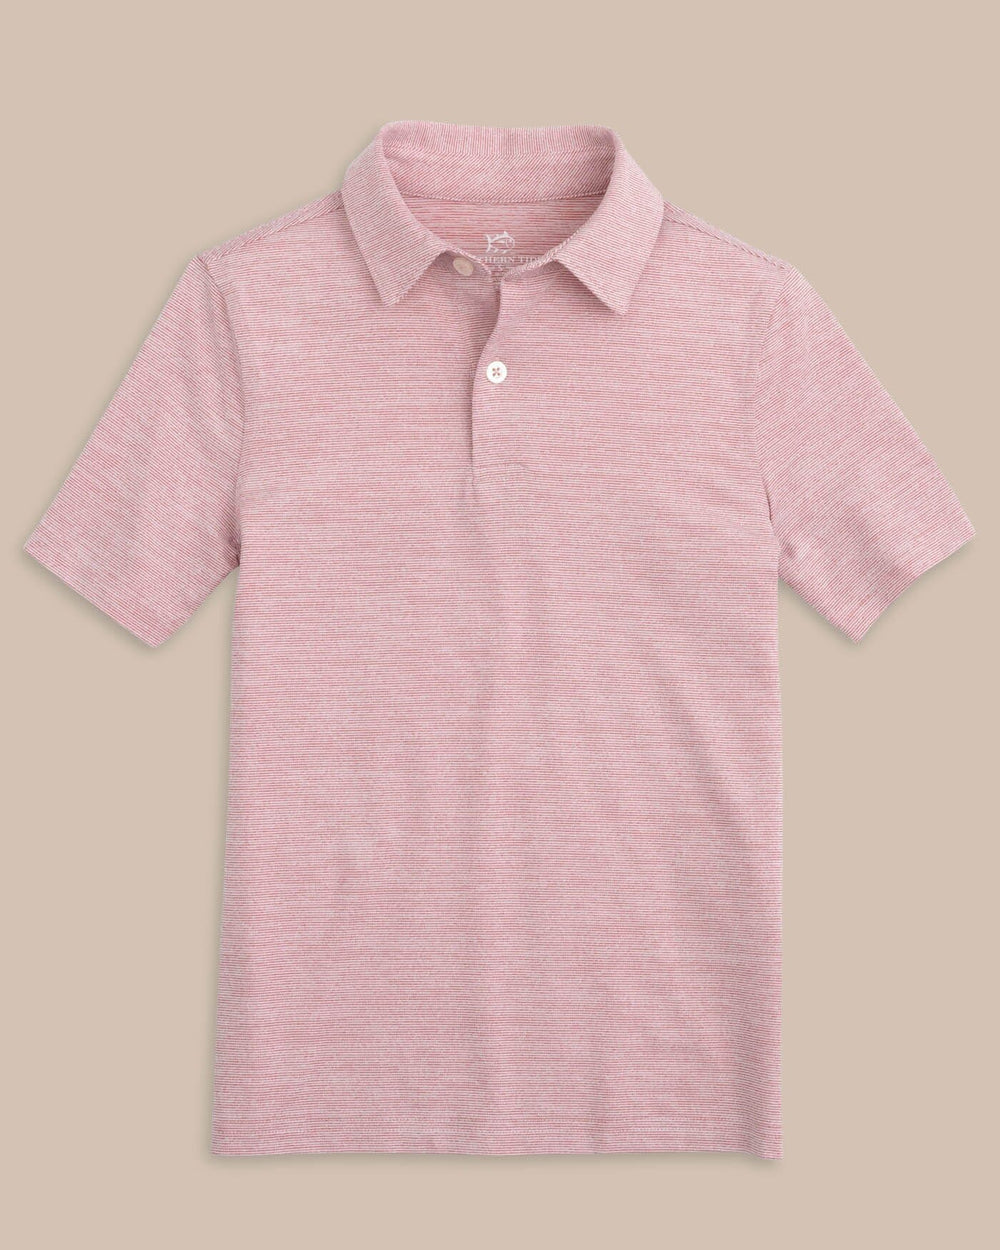 The front view of the Southern Tide Team Colors Boy's Driver Spacedye Polo Shirt by Southern Tide - Crimson